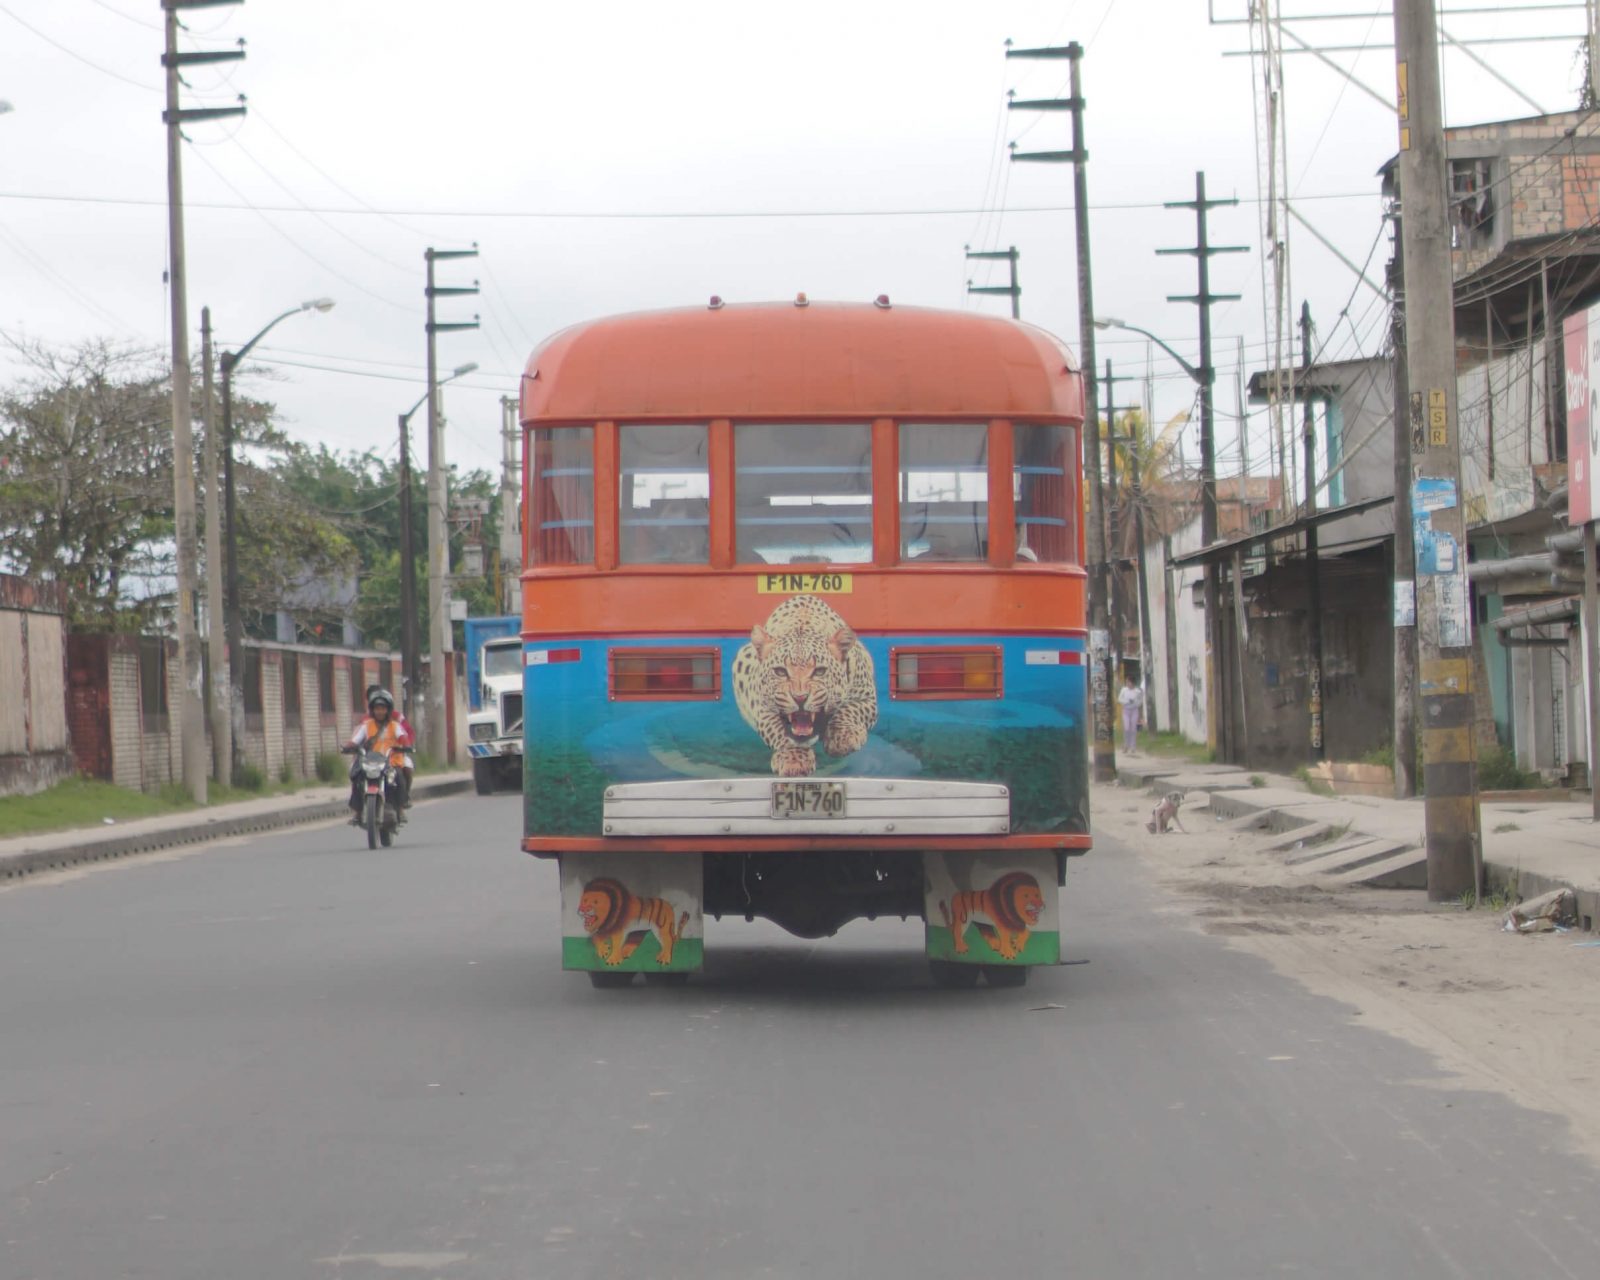 Wooden bus in Iquitos city